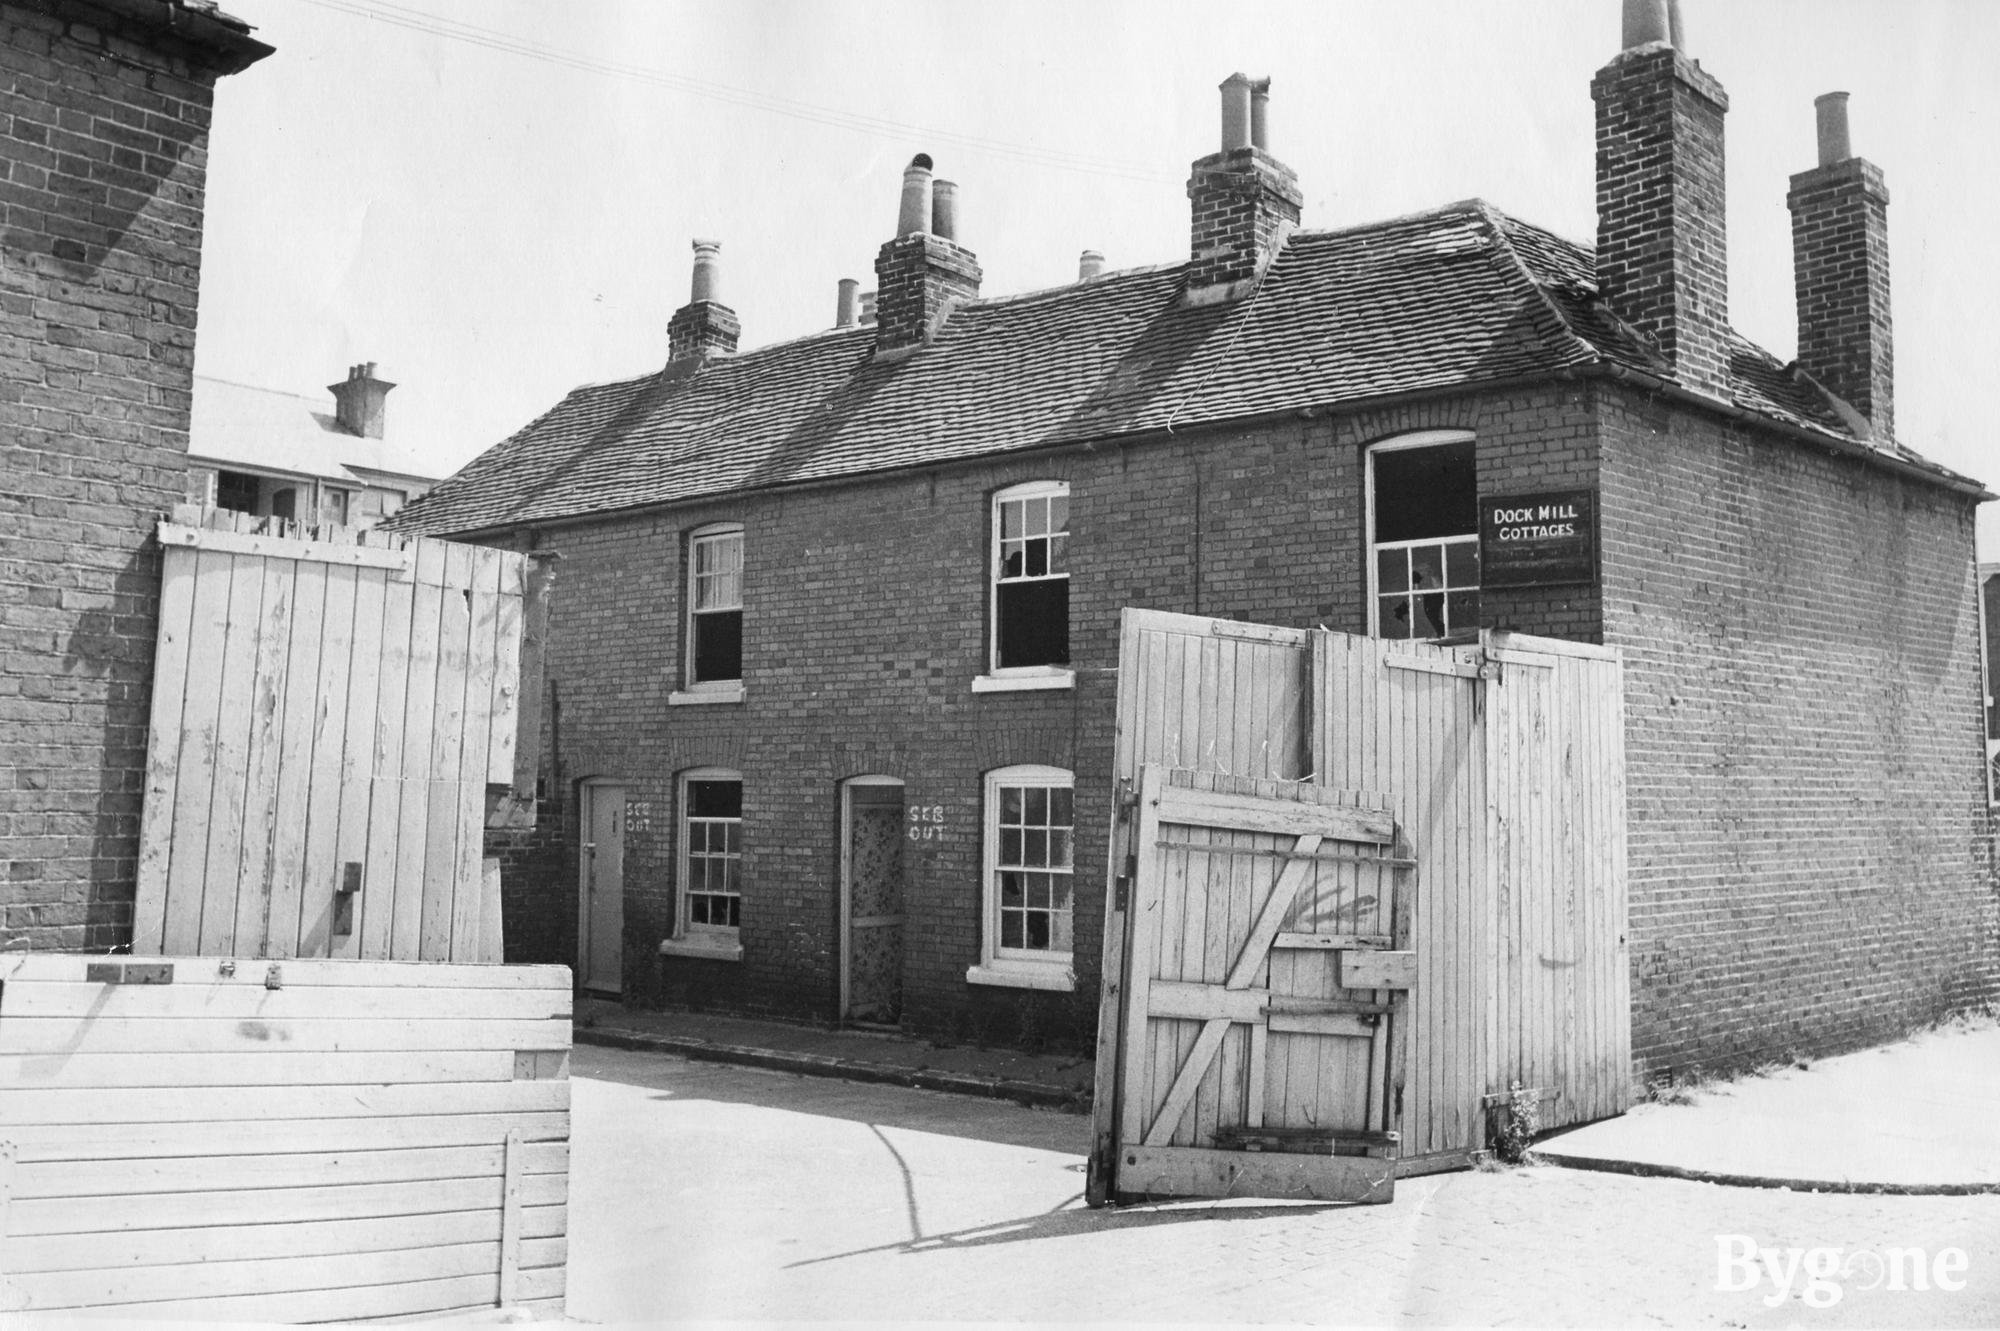 Dock mill cottages, 1970